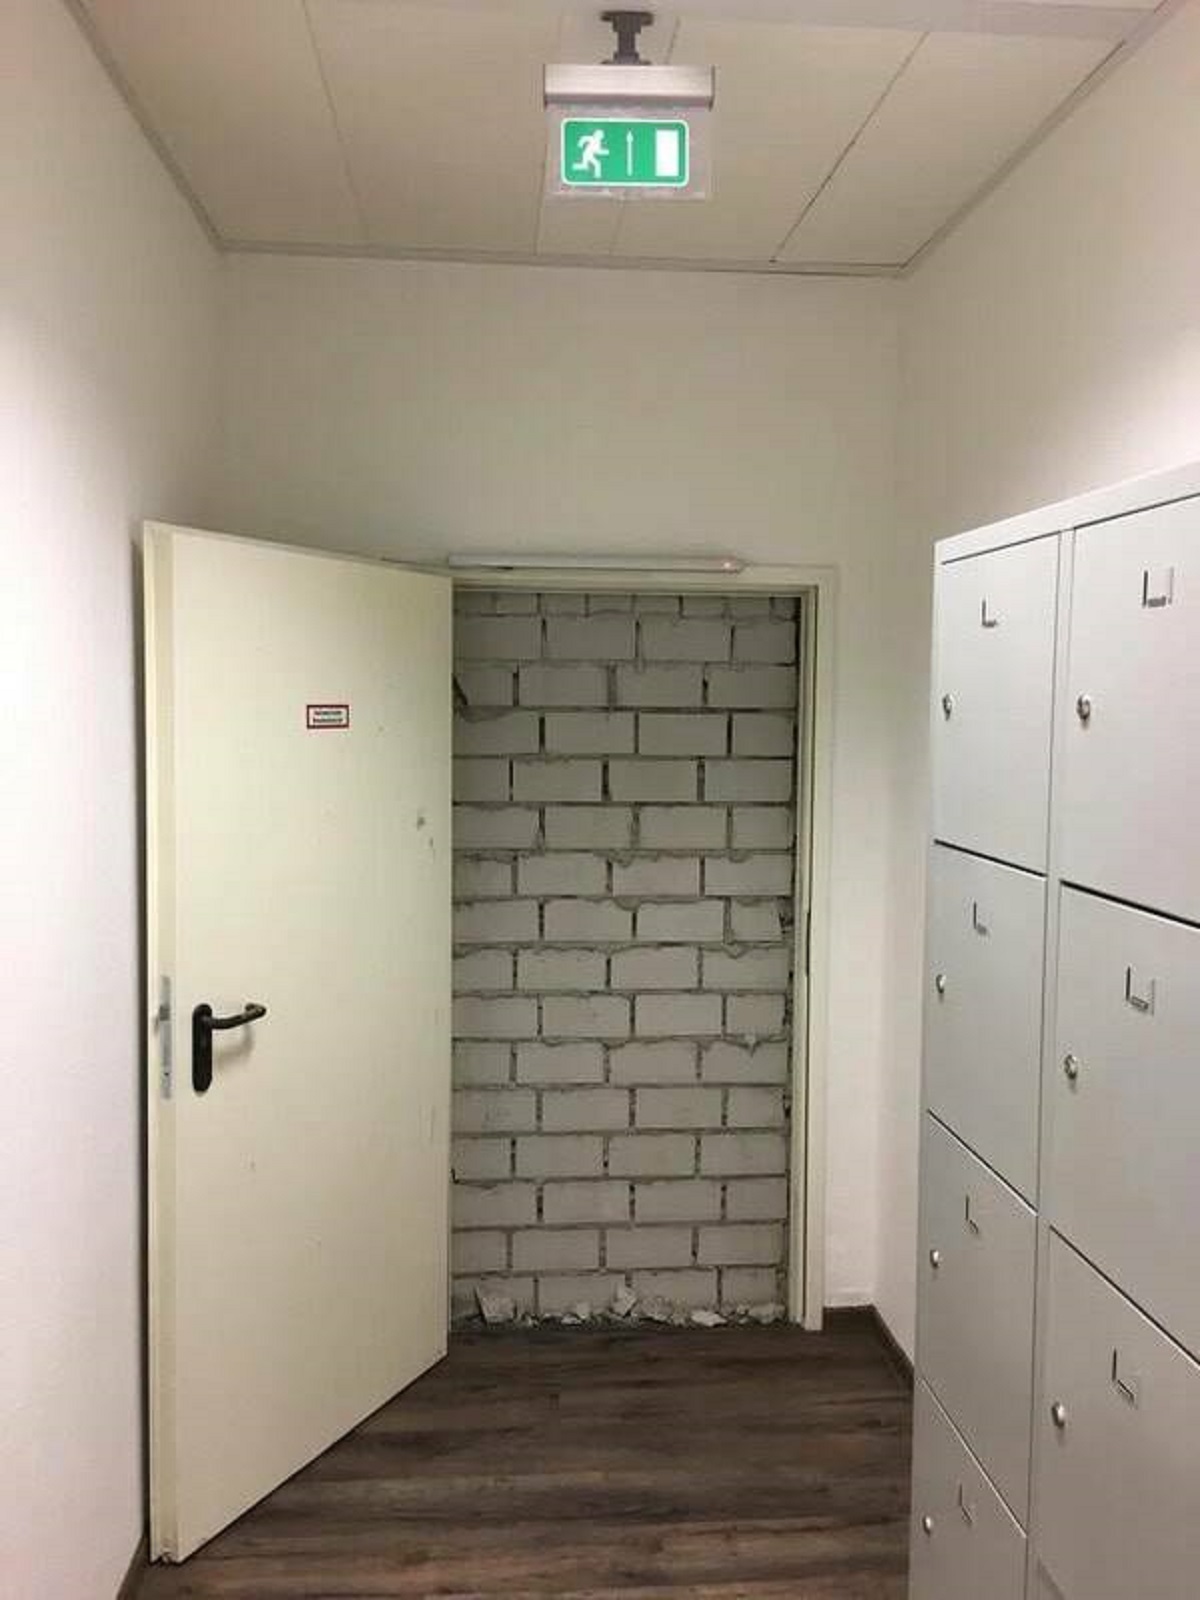 “Emergency ‘exit’ in a friend’s office building. First time they opened it was DURING A FIRE ALARM”